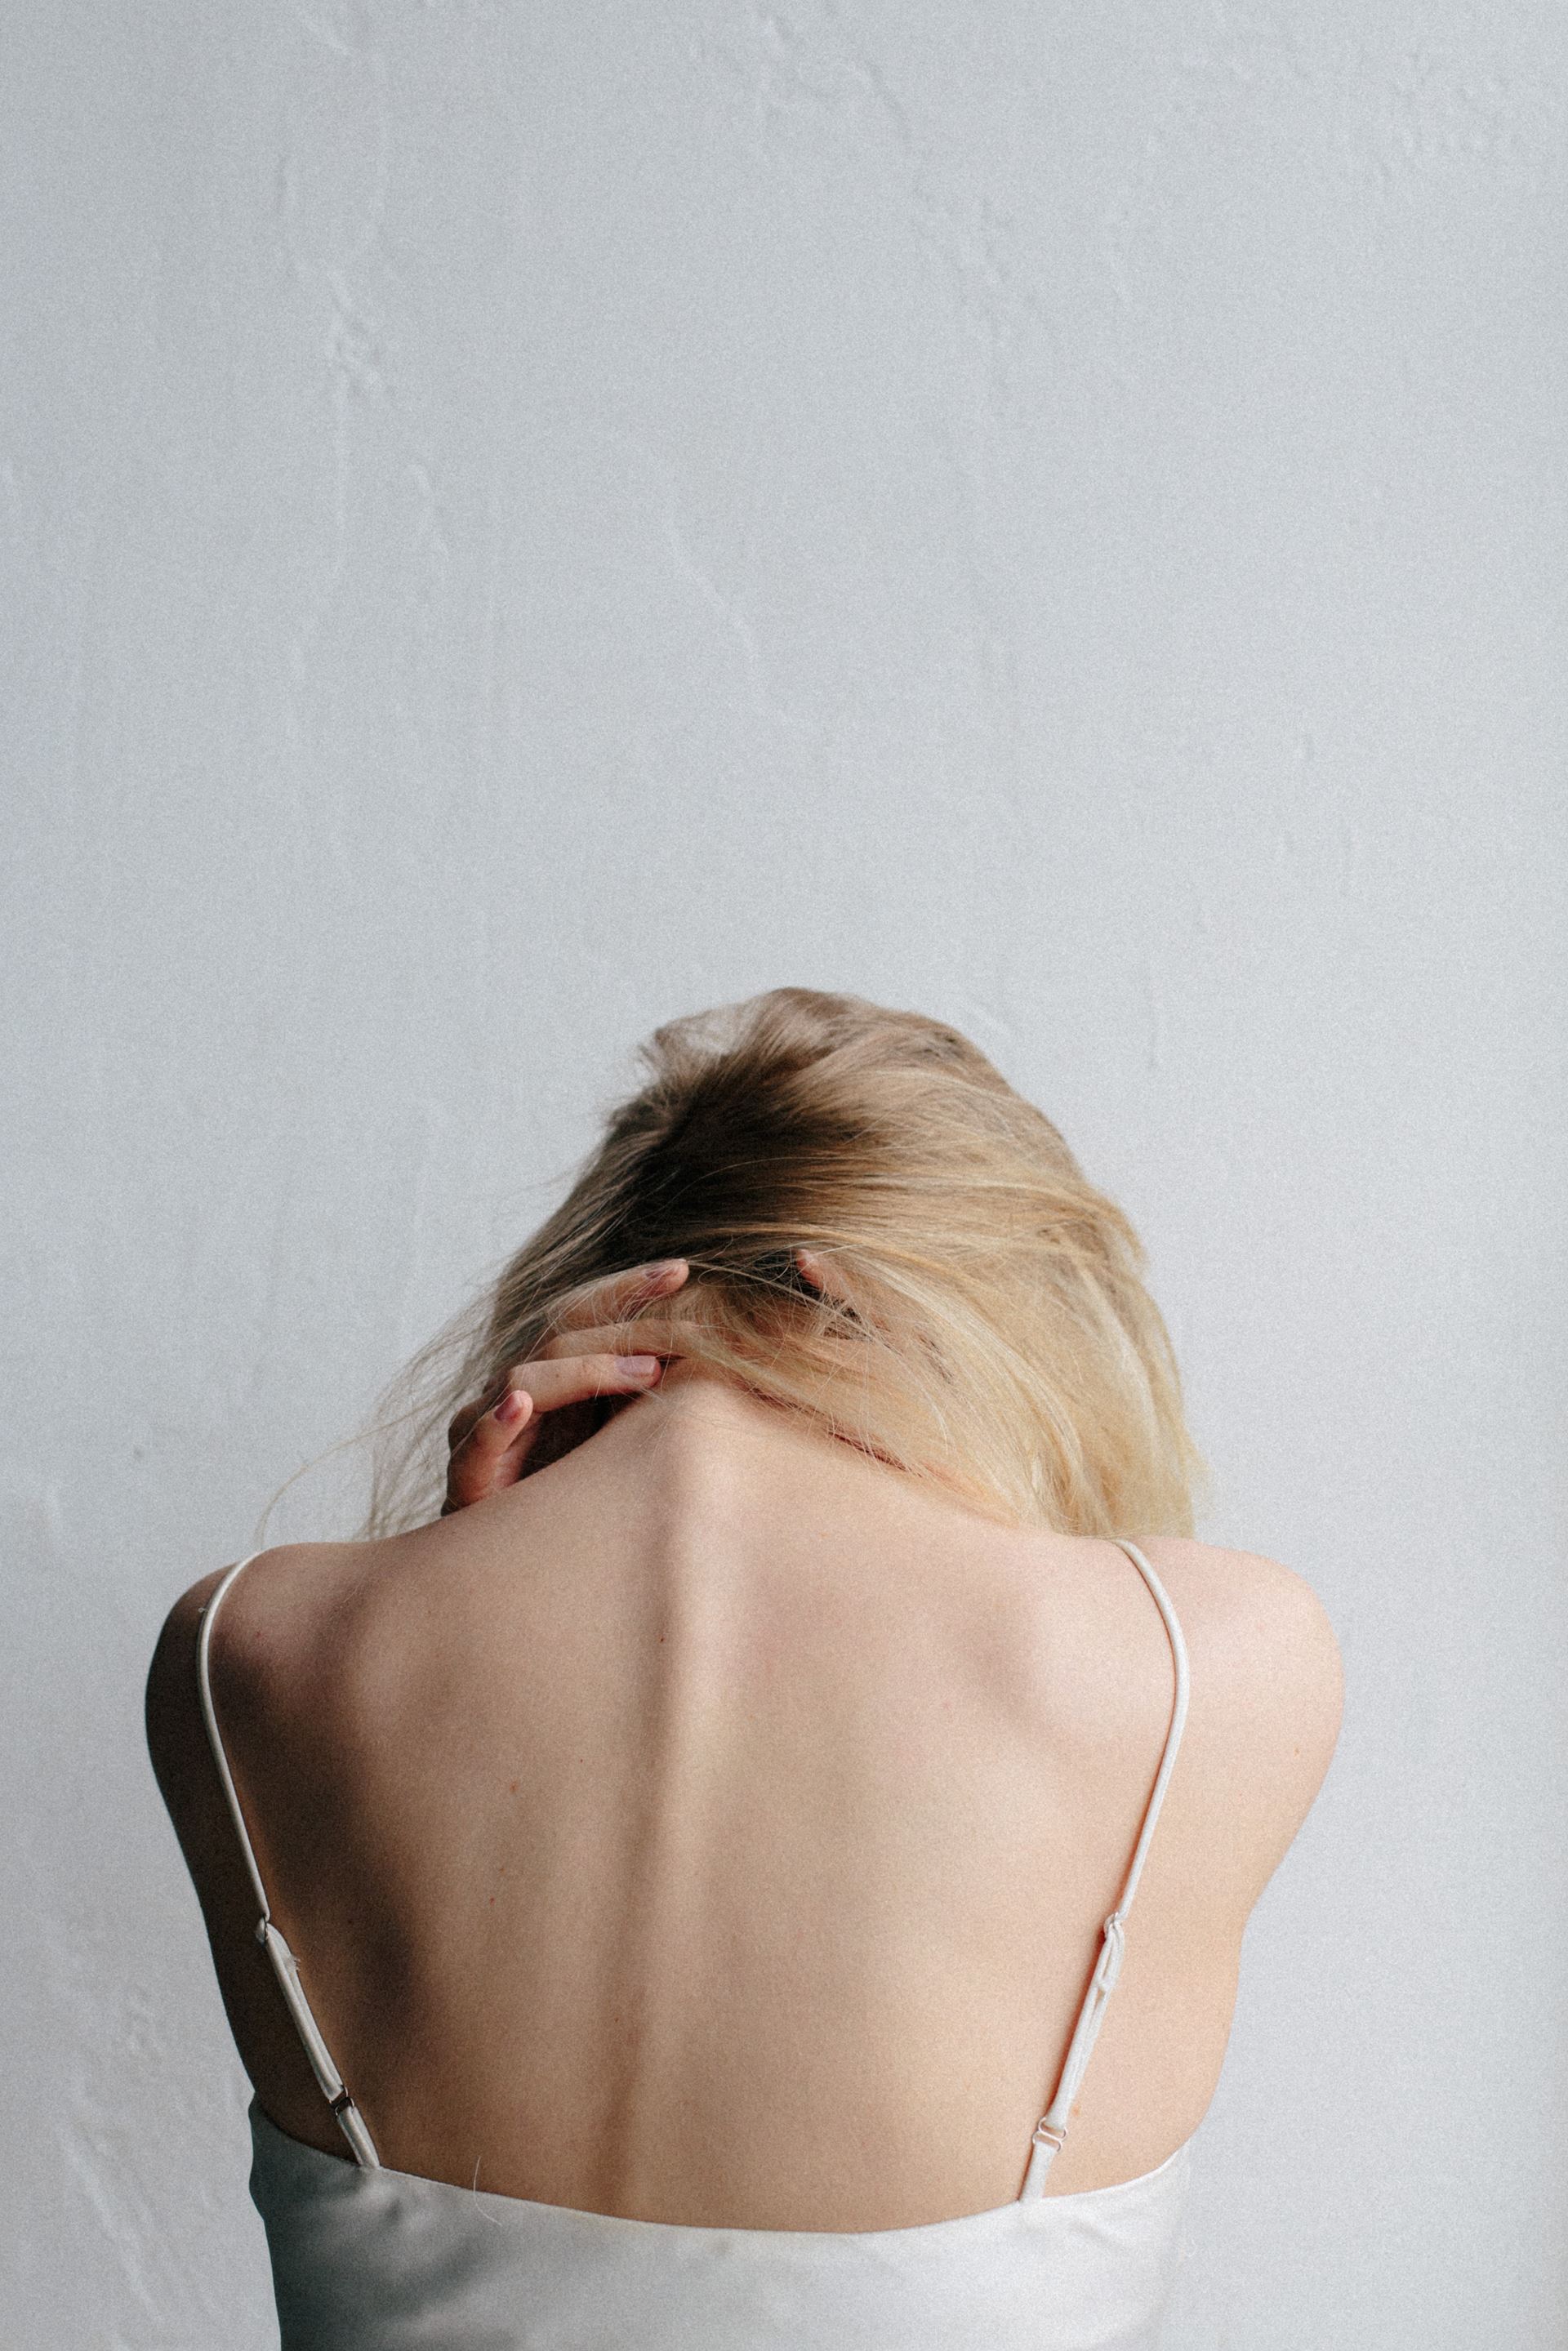 A woman with blonde hair rubbing the back of her neck in pain